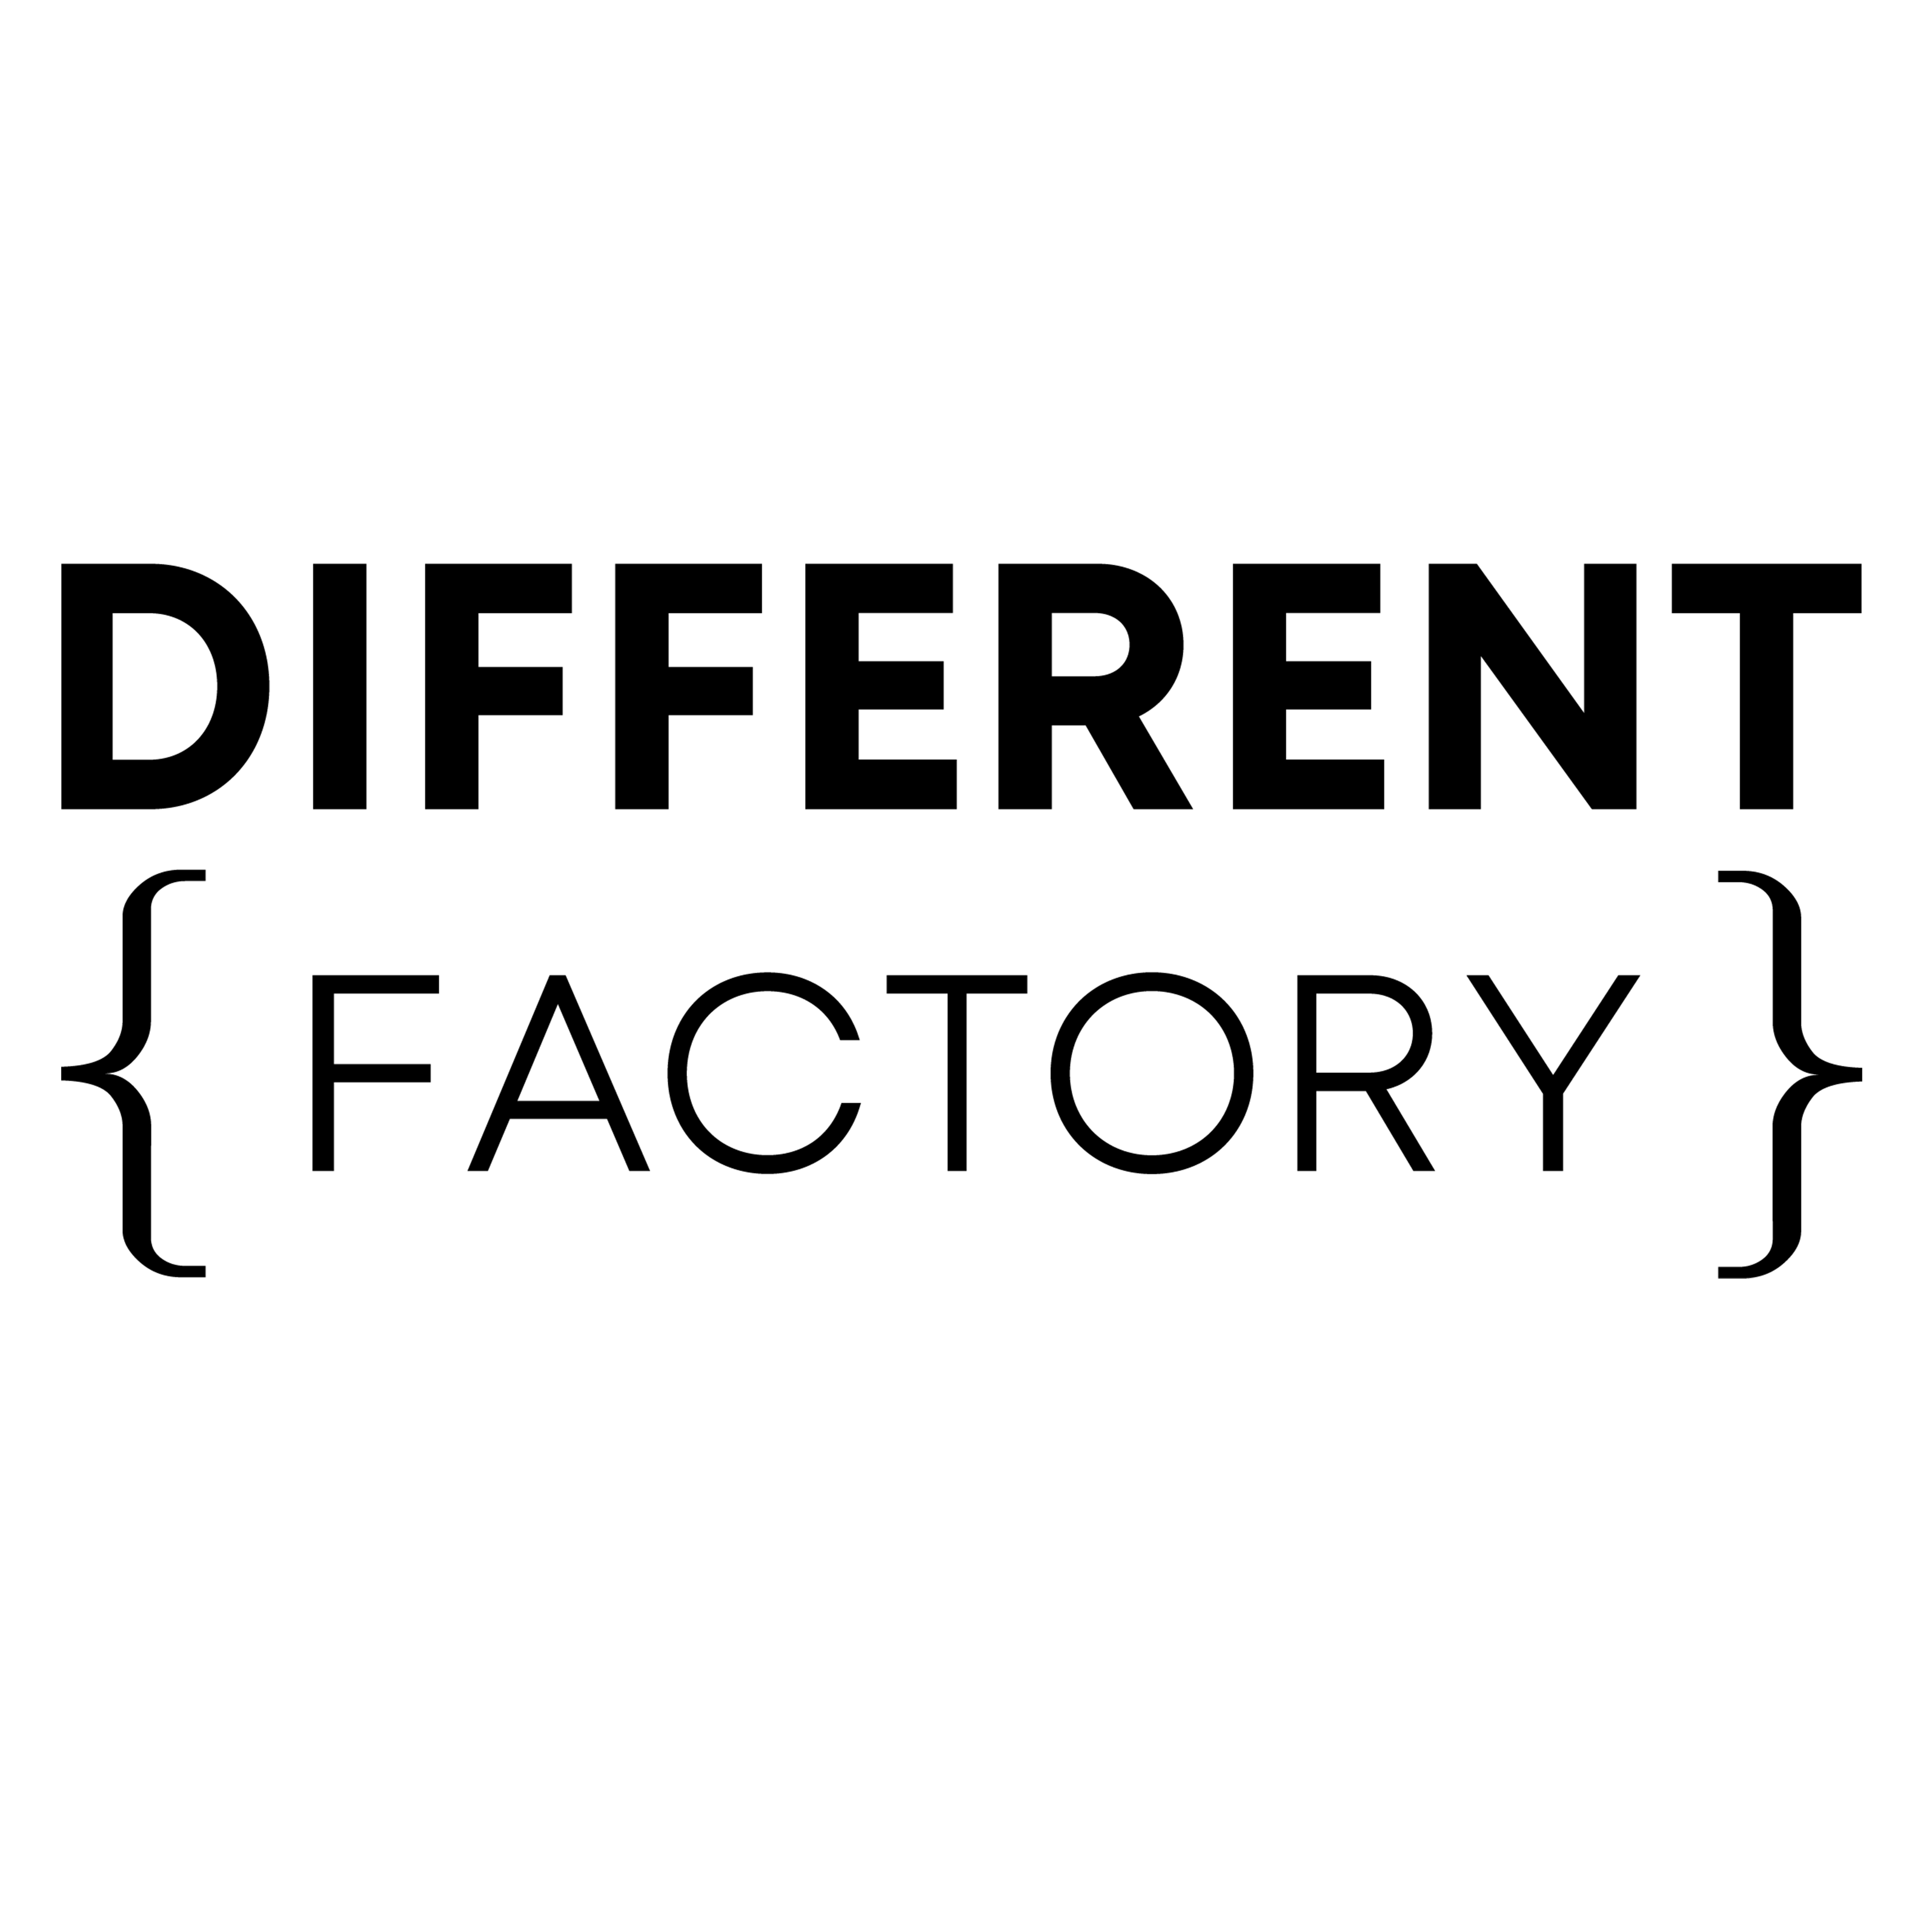 Different Factory